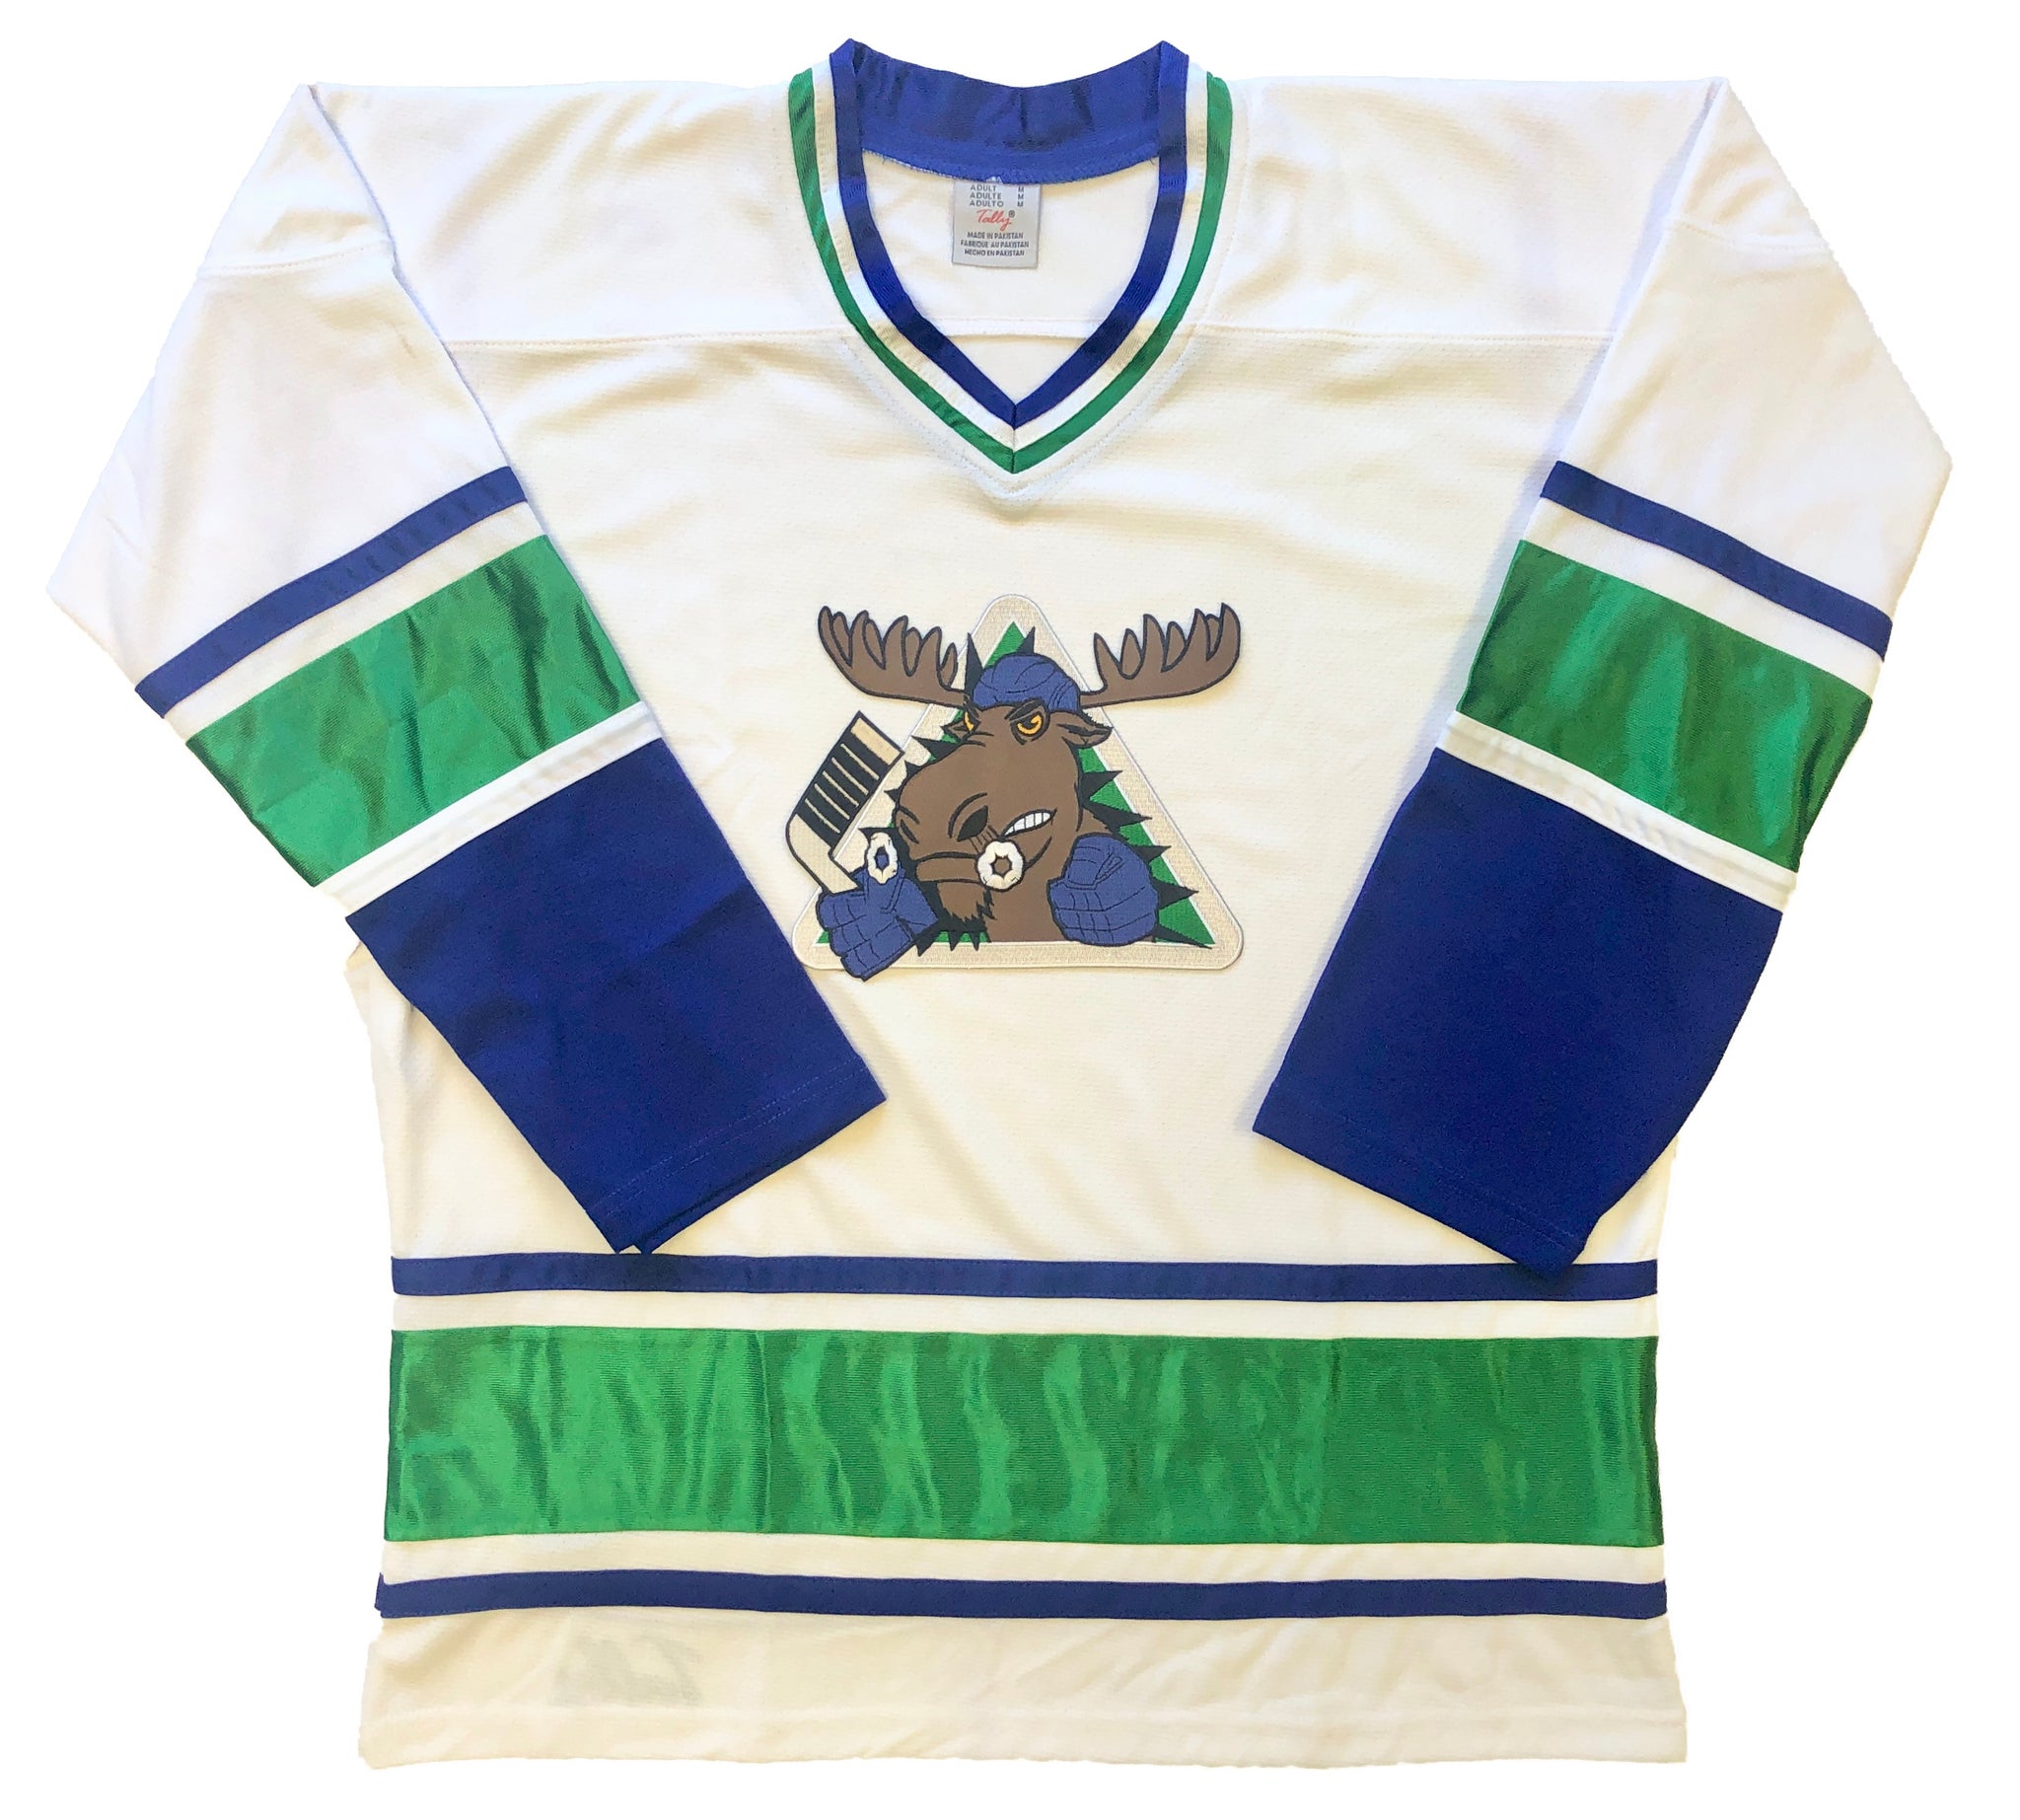 GRISWOLD Jersey with Embroidered Twill Crests and Sleeve Numbers – Tally  Hockey Jerseys